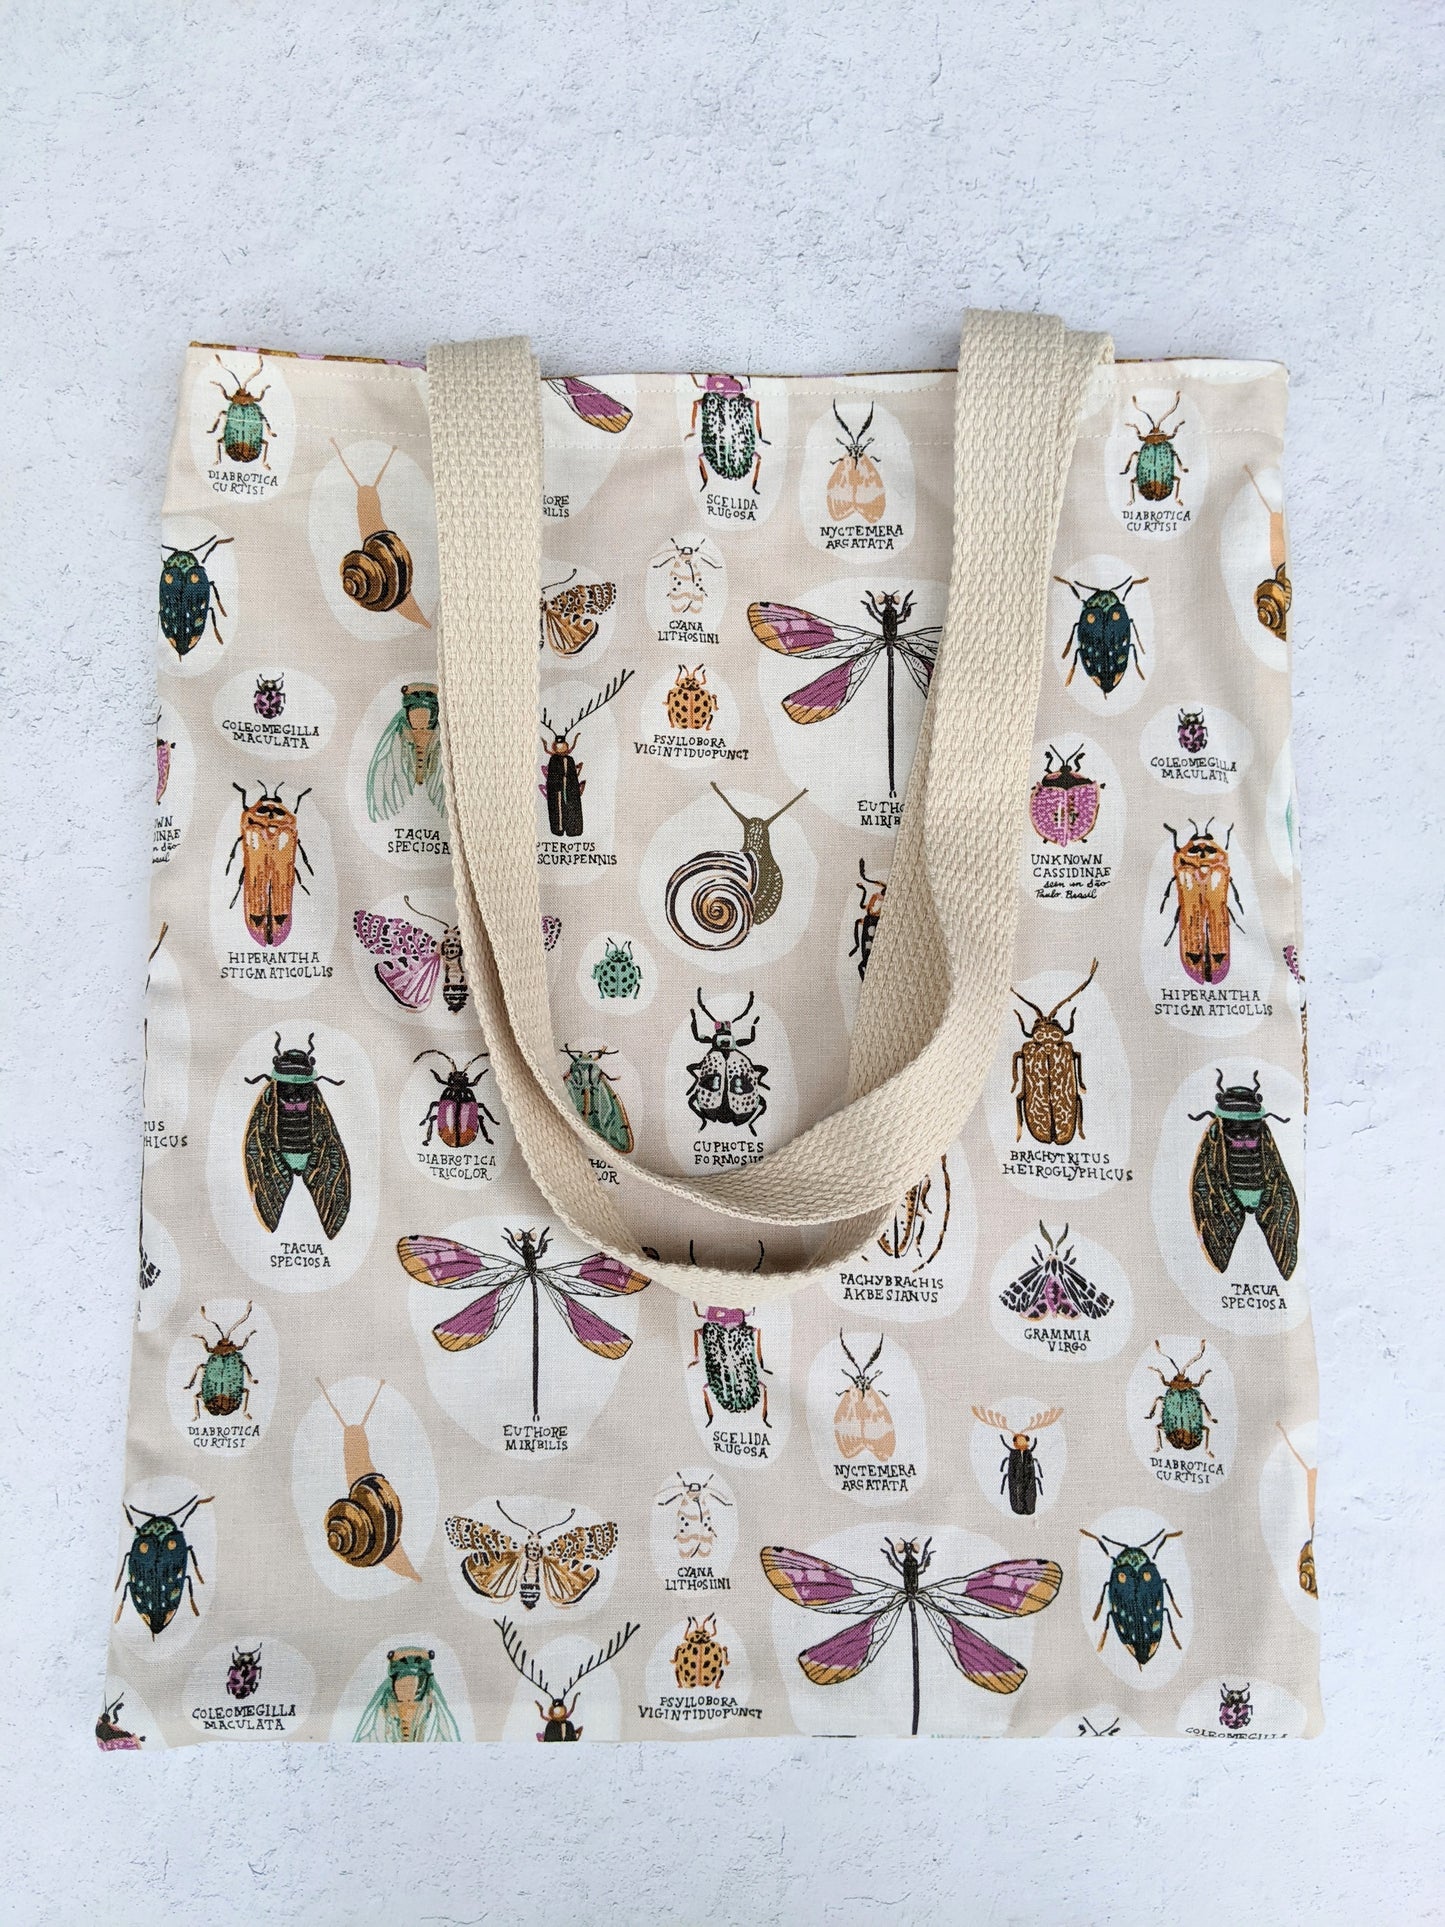 The Reversible Tote Bag - Critter Collection